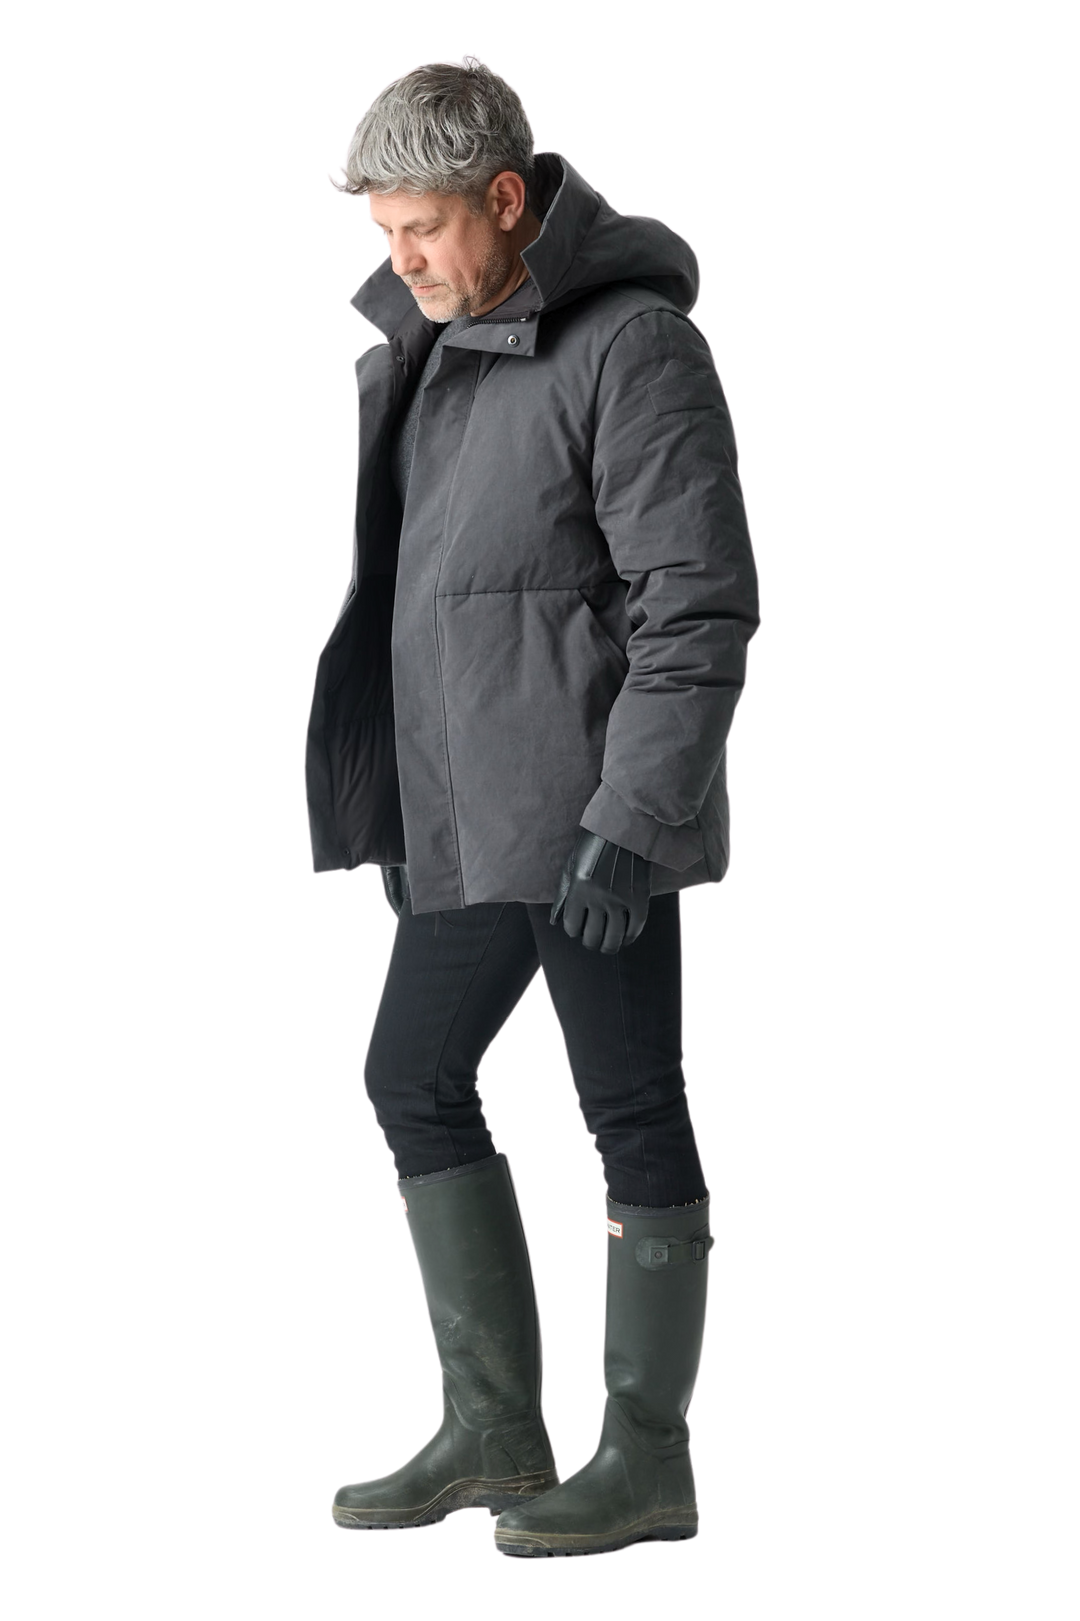 OUTERWEAR BRAND ARCTIX LAUNCHES CAMPAIGN TO HELP PROTECT AMERICA'S HOMELESS  POPULATION - MR Magazine